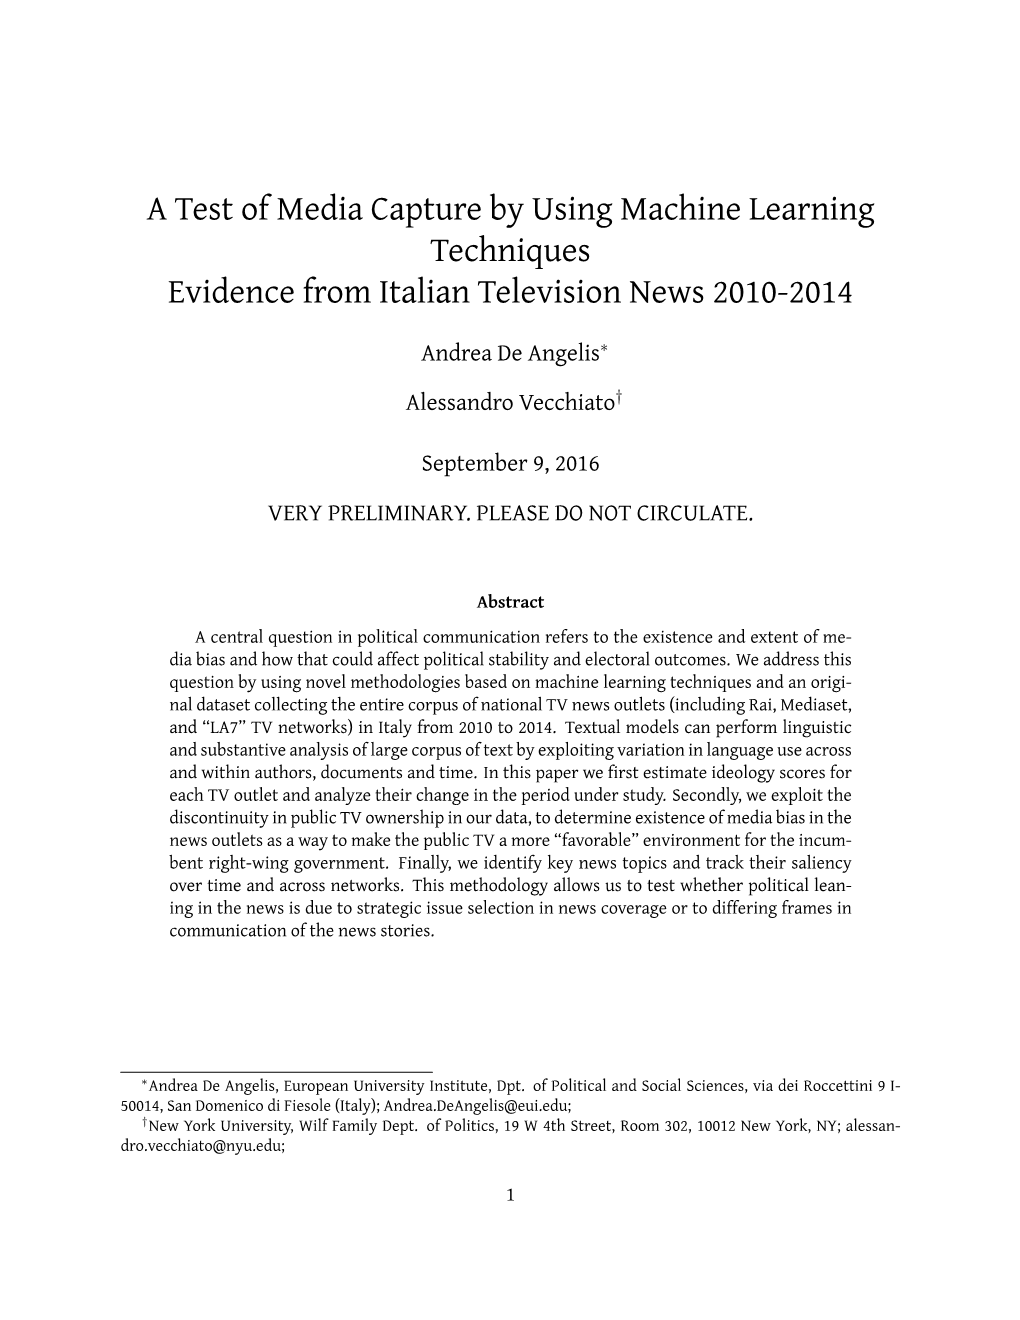 A Test of Media Capture by Using Machine Learning Techniques Evidence from Italian Television News 2010-2014